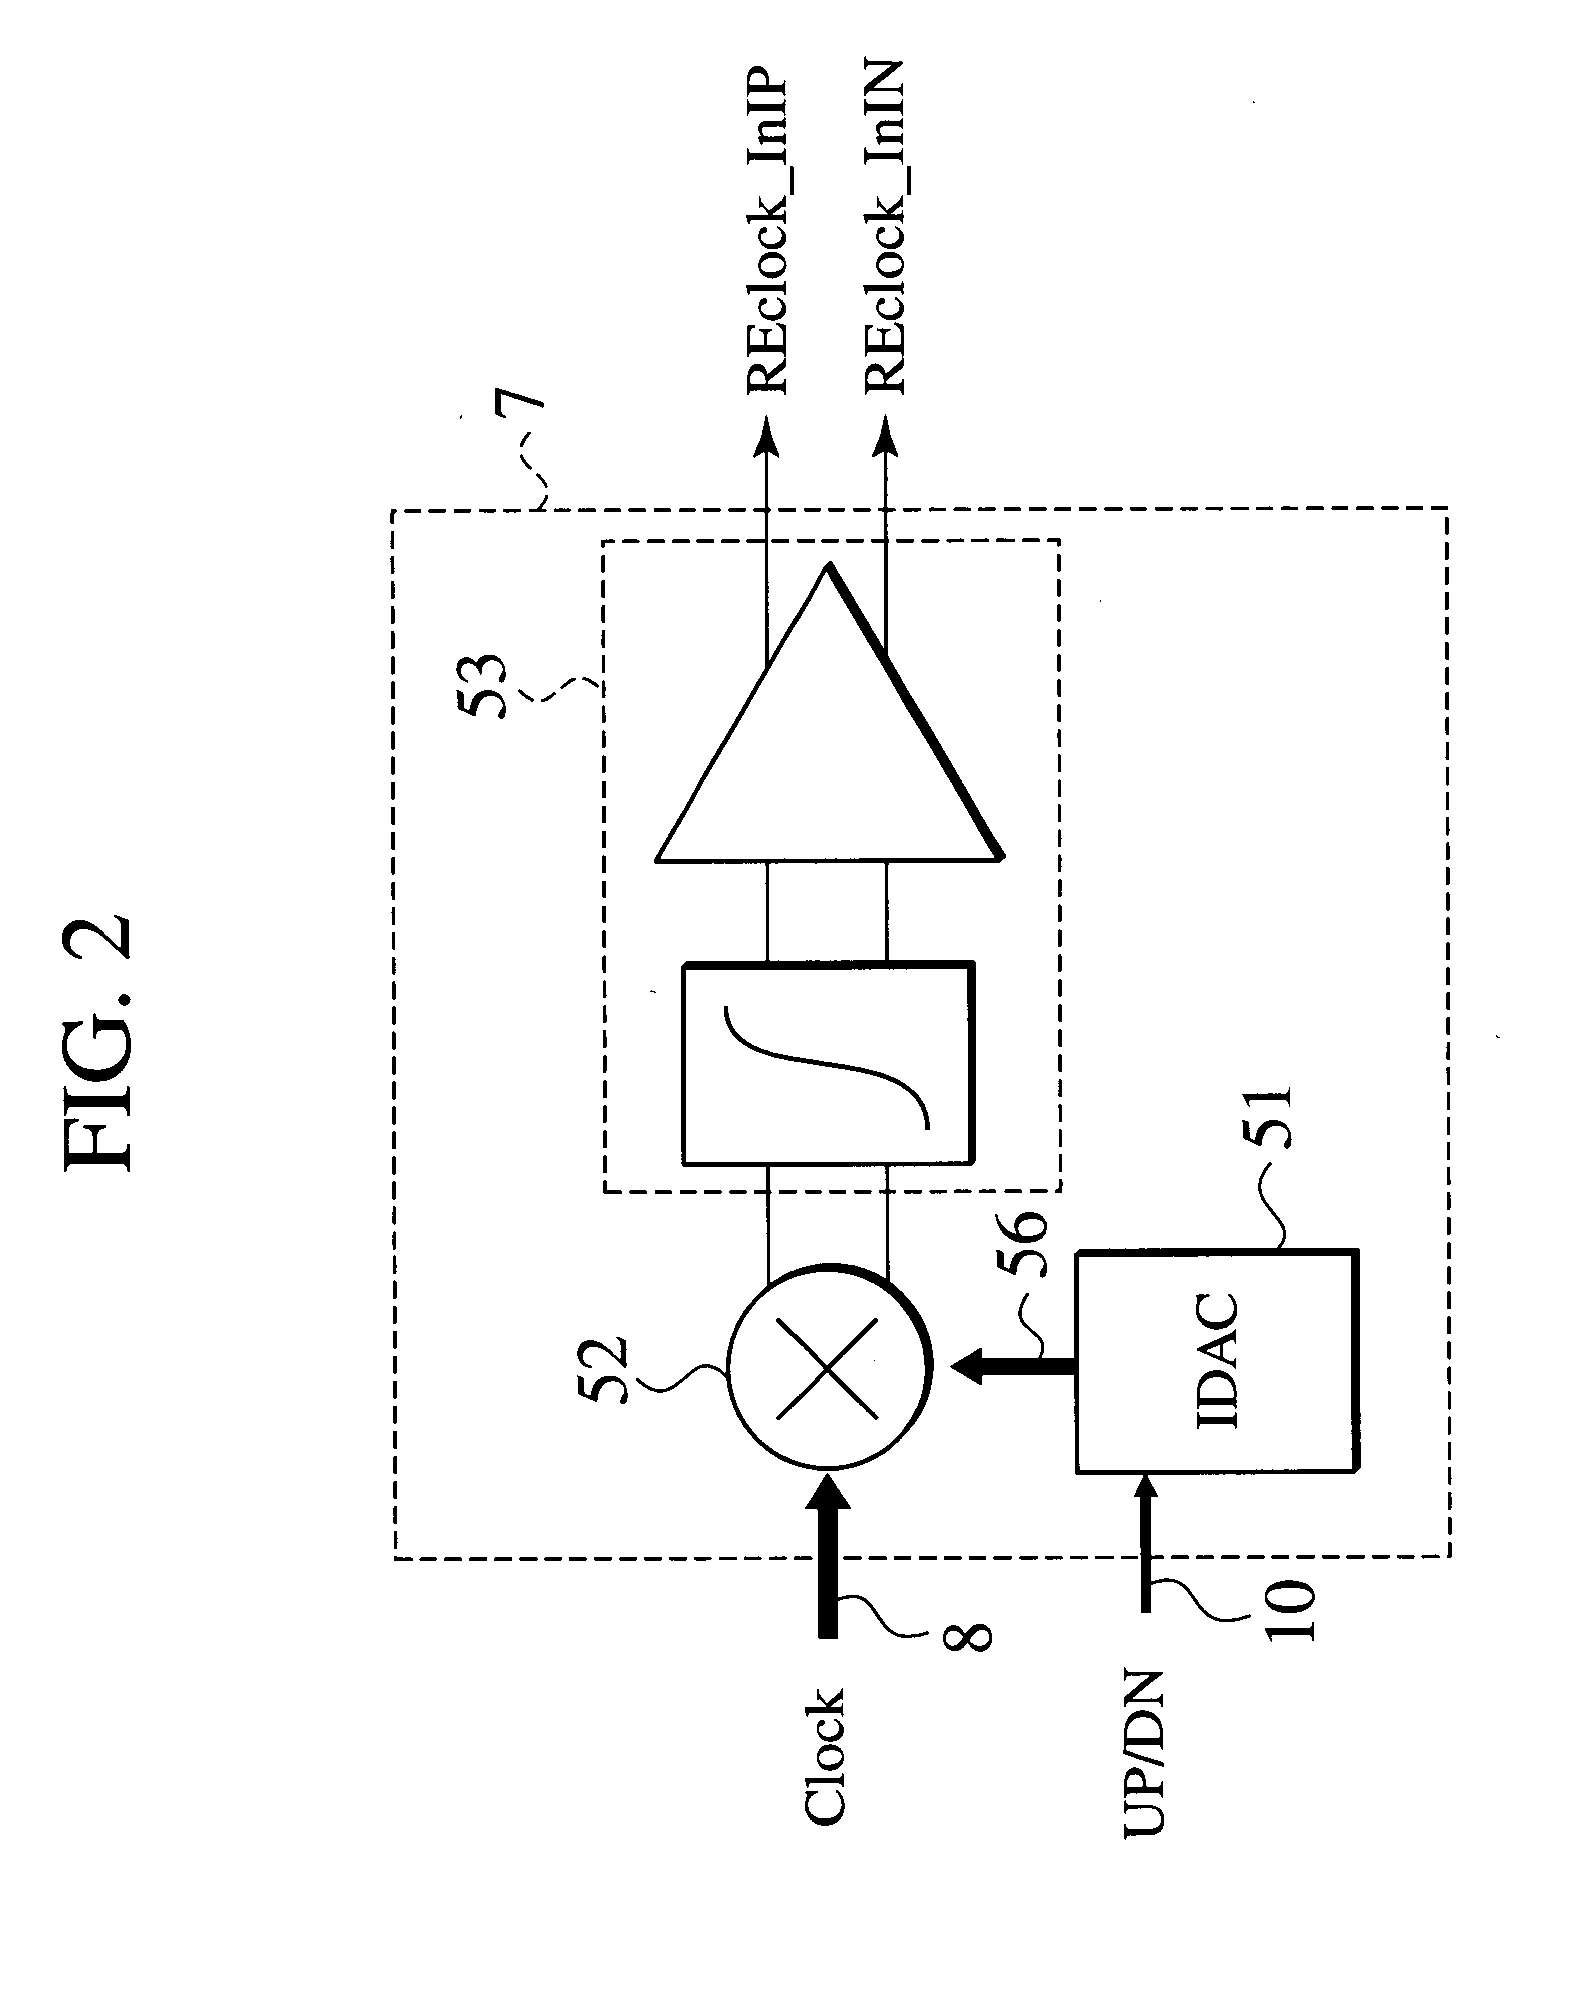 Phase interpolator and receiver